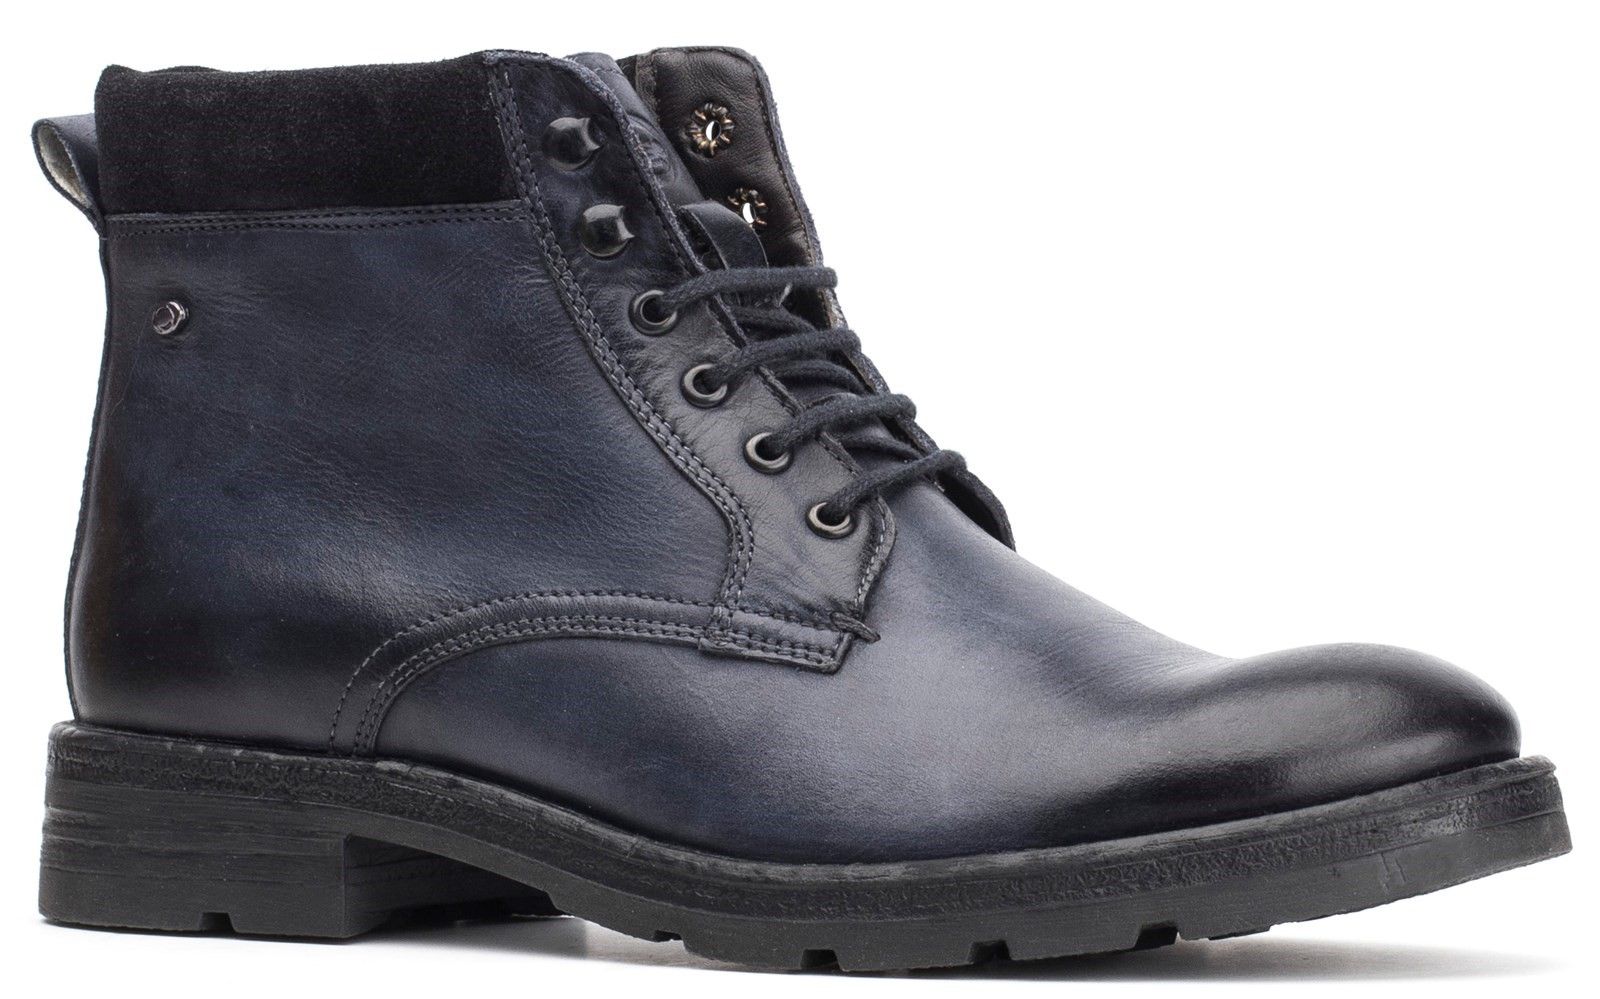 Panzer is a new Work Boot from the Tank Range. Its chunky rubber sole is perfect for winter weather while adding a masculine edge to your outfit. This ankle boot features a padded cuff for style and comfort & a pull tab for easy access. Finest quality leathers, individually washed for an authentic vintage look. 
High quality leather lining.